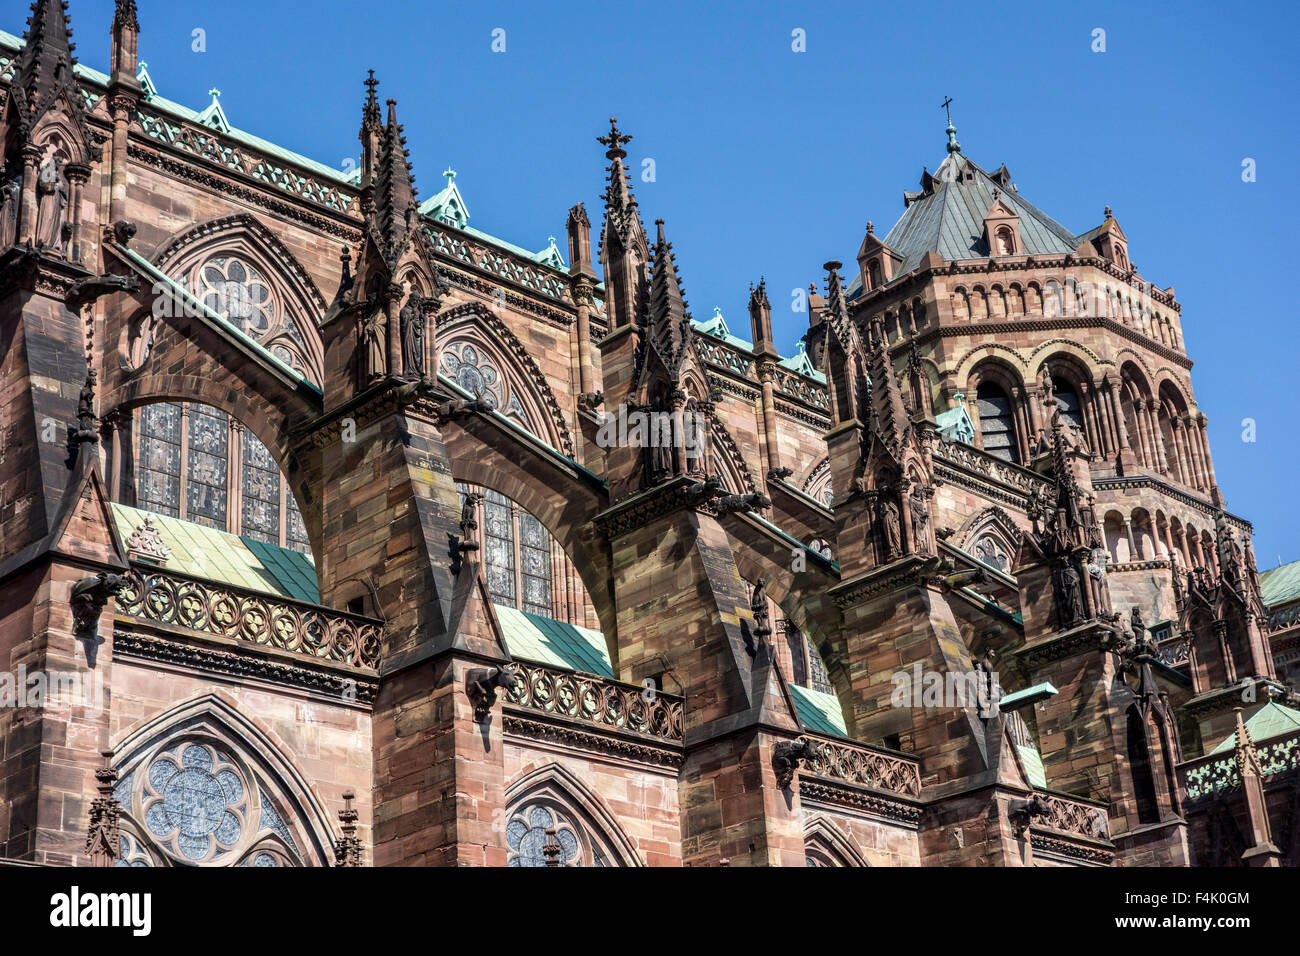 Flying buttresses of the Cathedral of Our Lady of Strasbourg / Cathédrale Notre-Dame de Strasbourg, Alsace, France Stock Photo